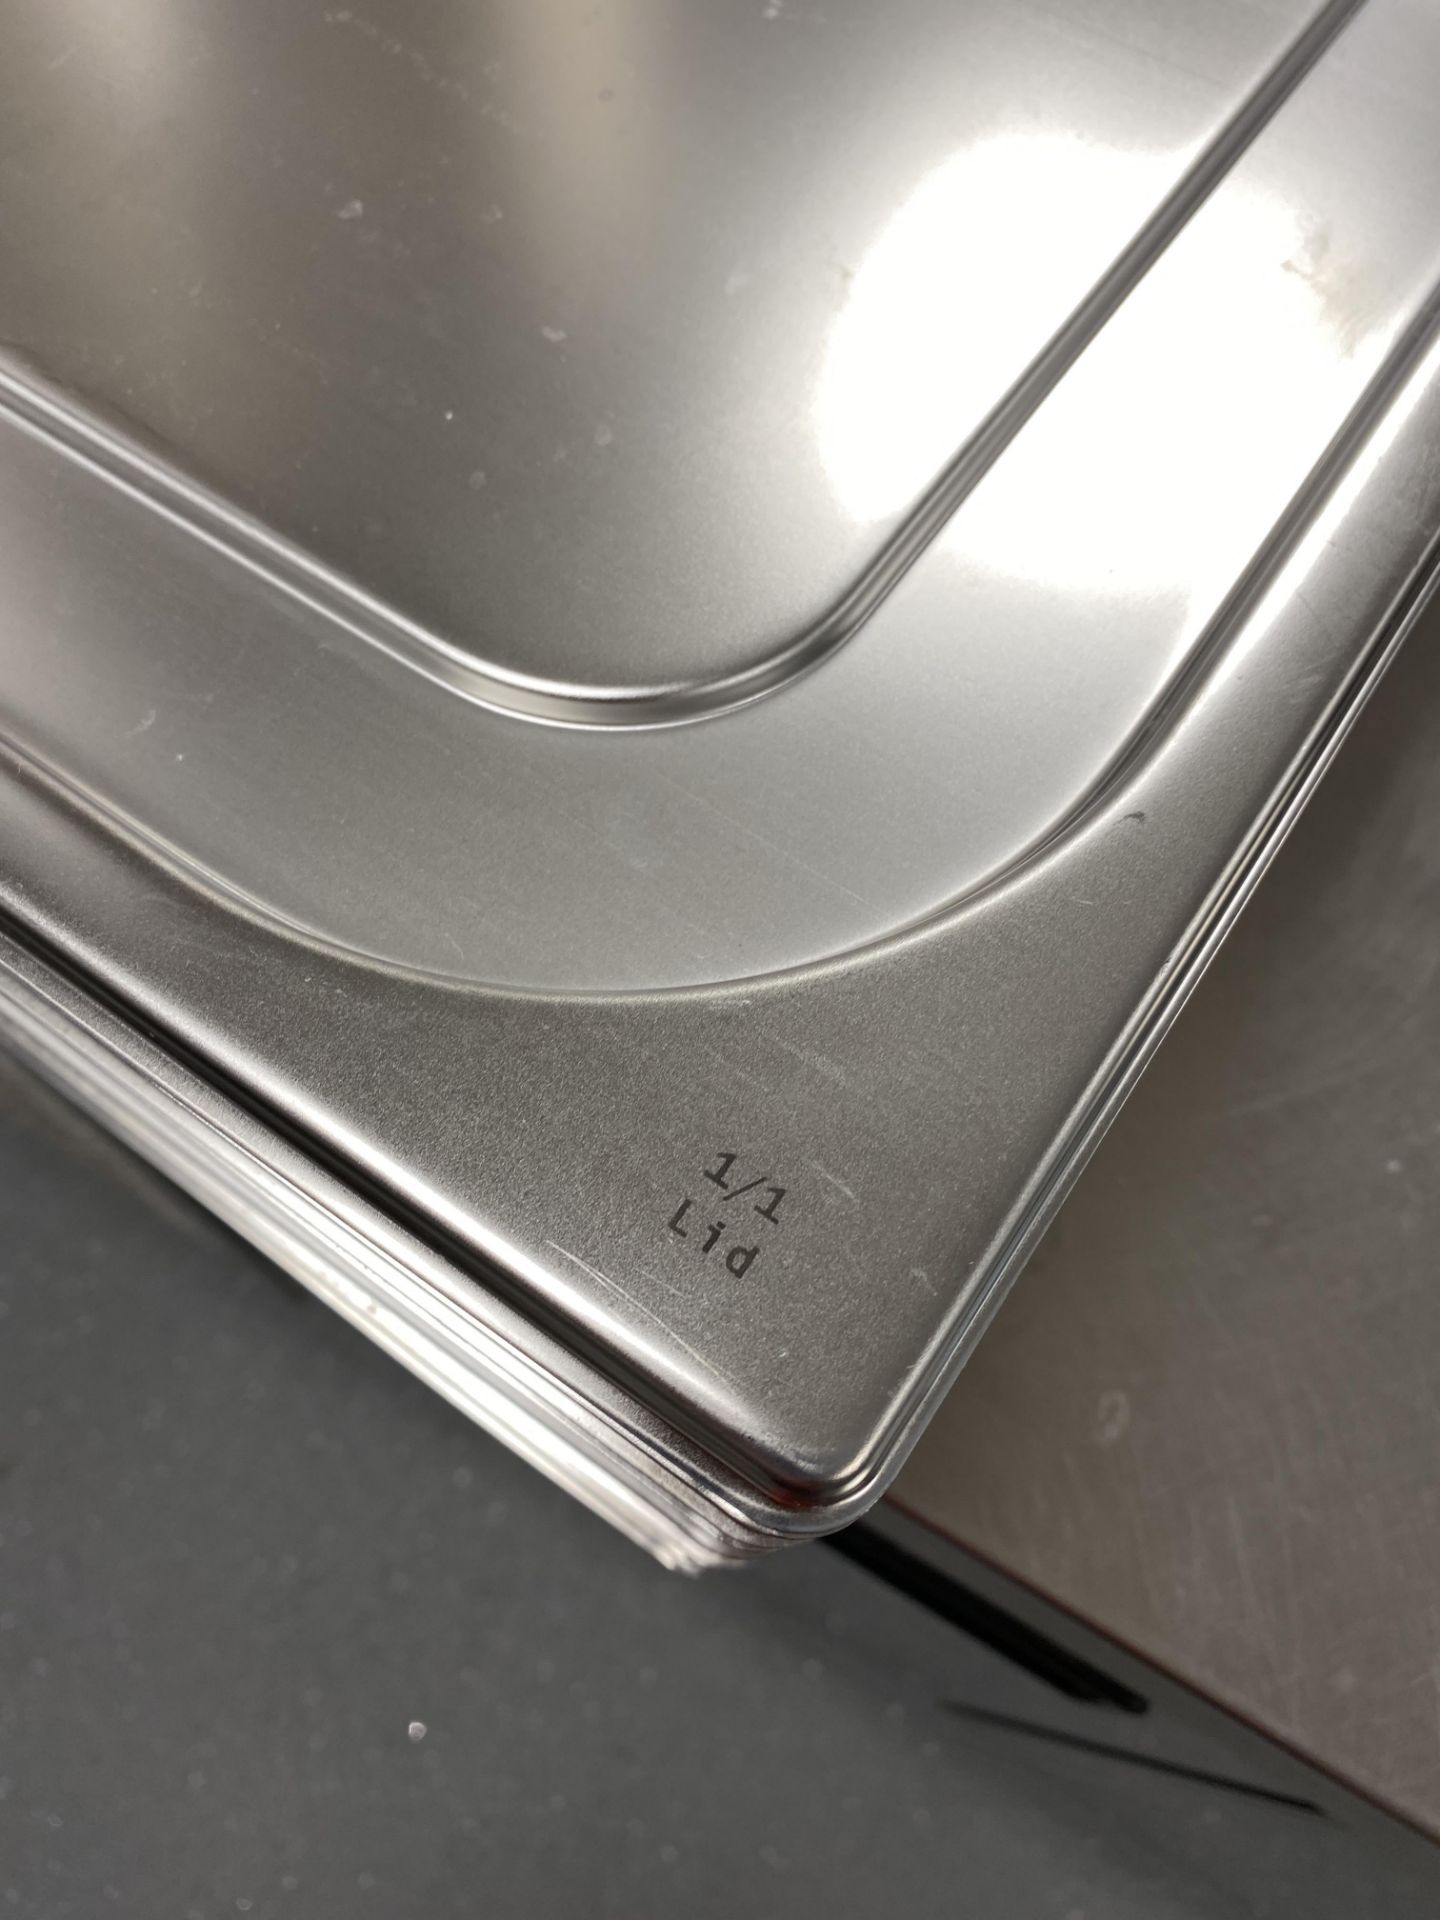 5: Genware Stainless Steel Gastronorm Pans, 5.8 Litre Capacity, Size - 1/1 40mm, with Lids - Current - Image 2 of 5